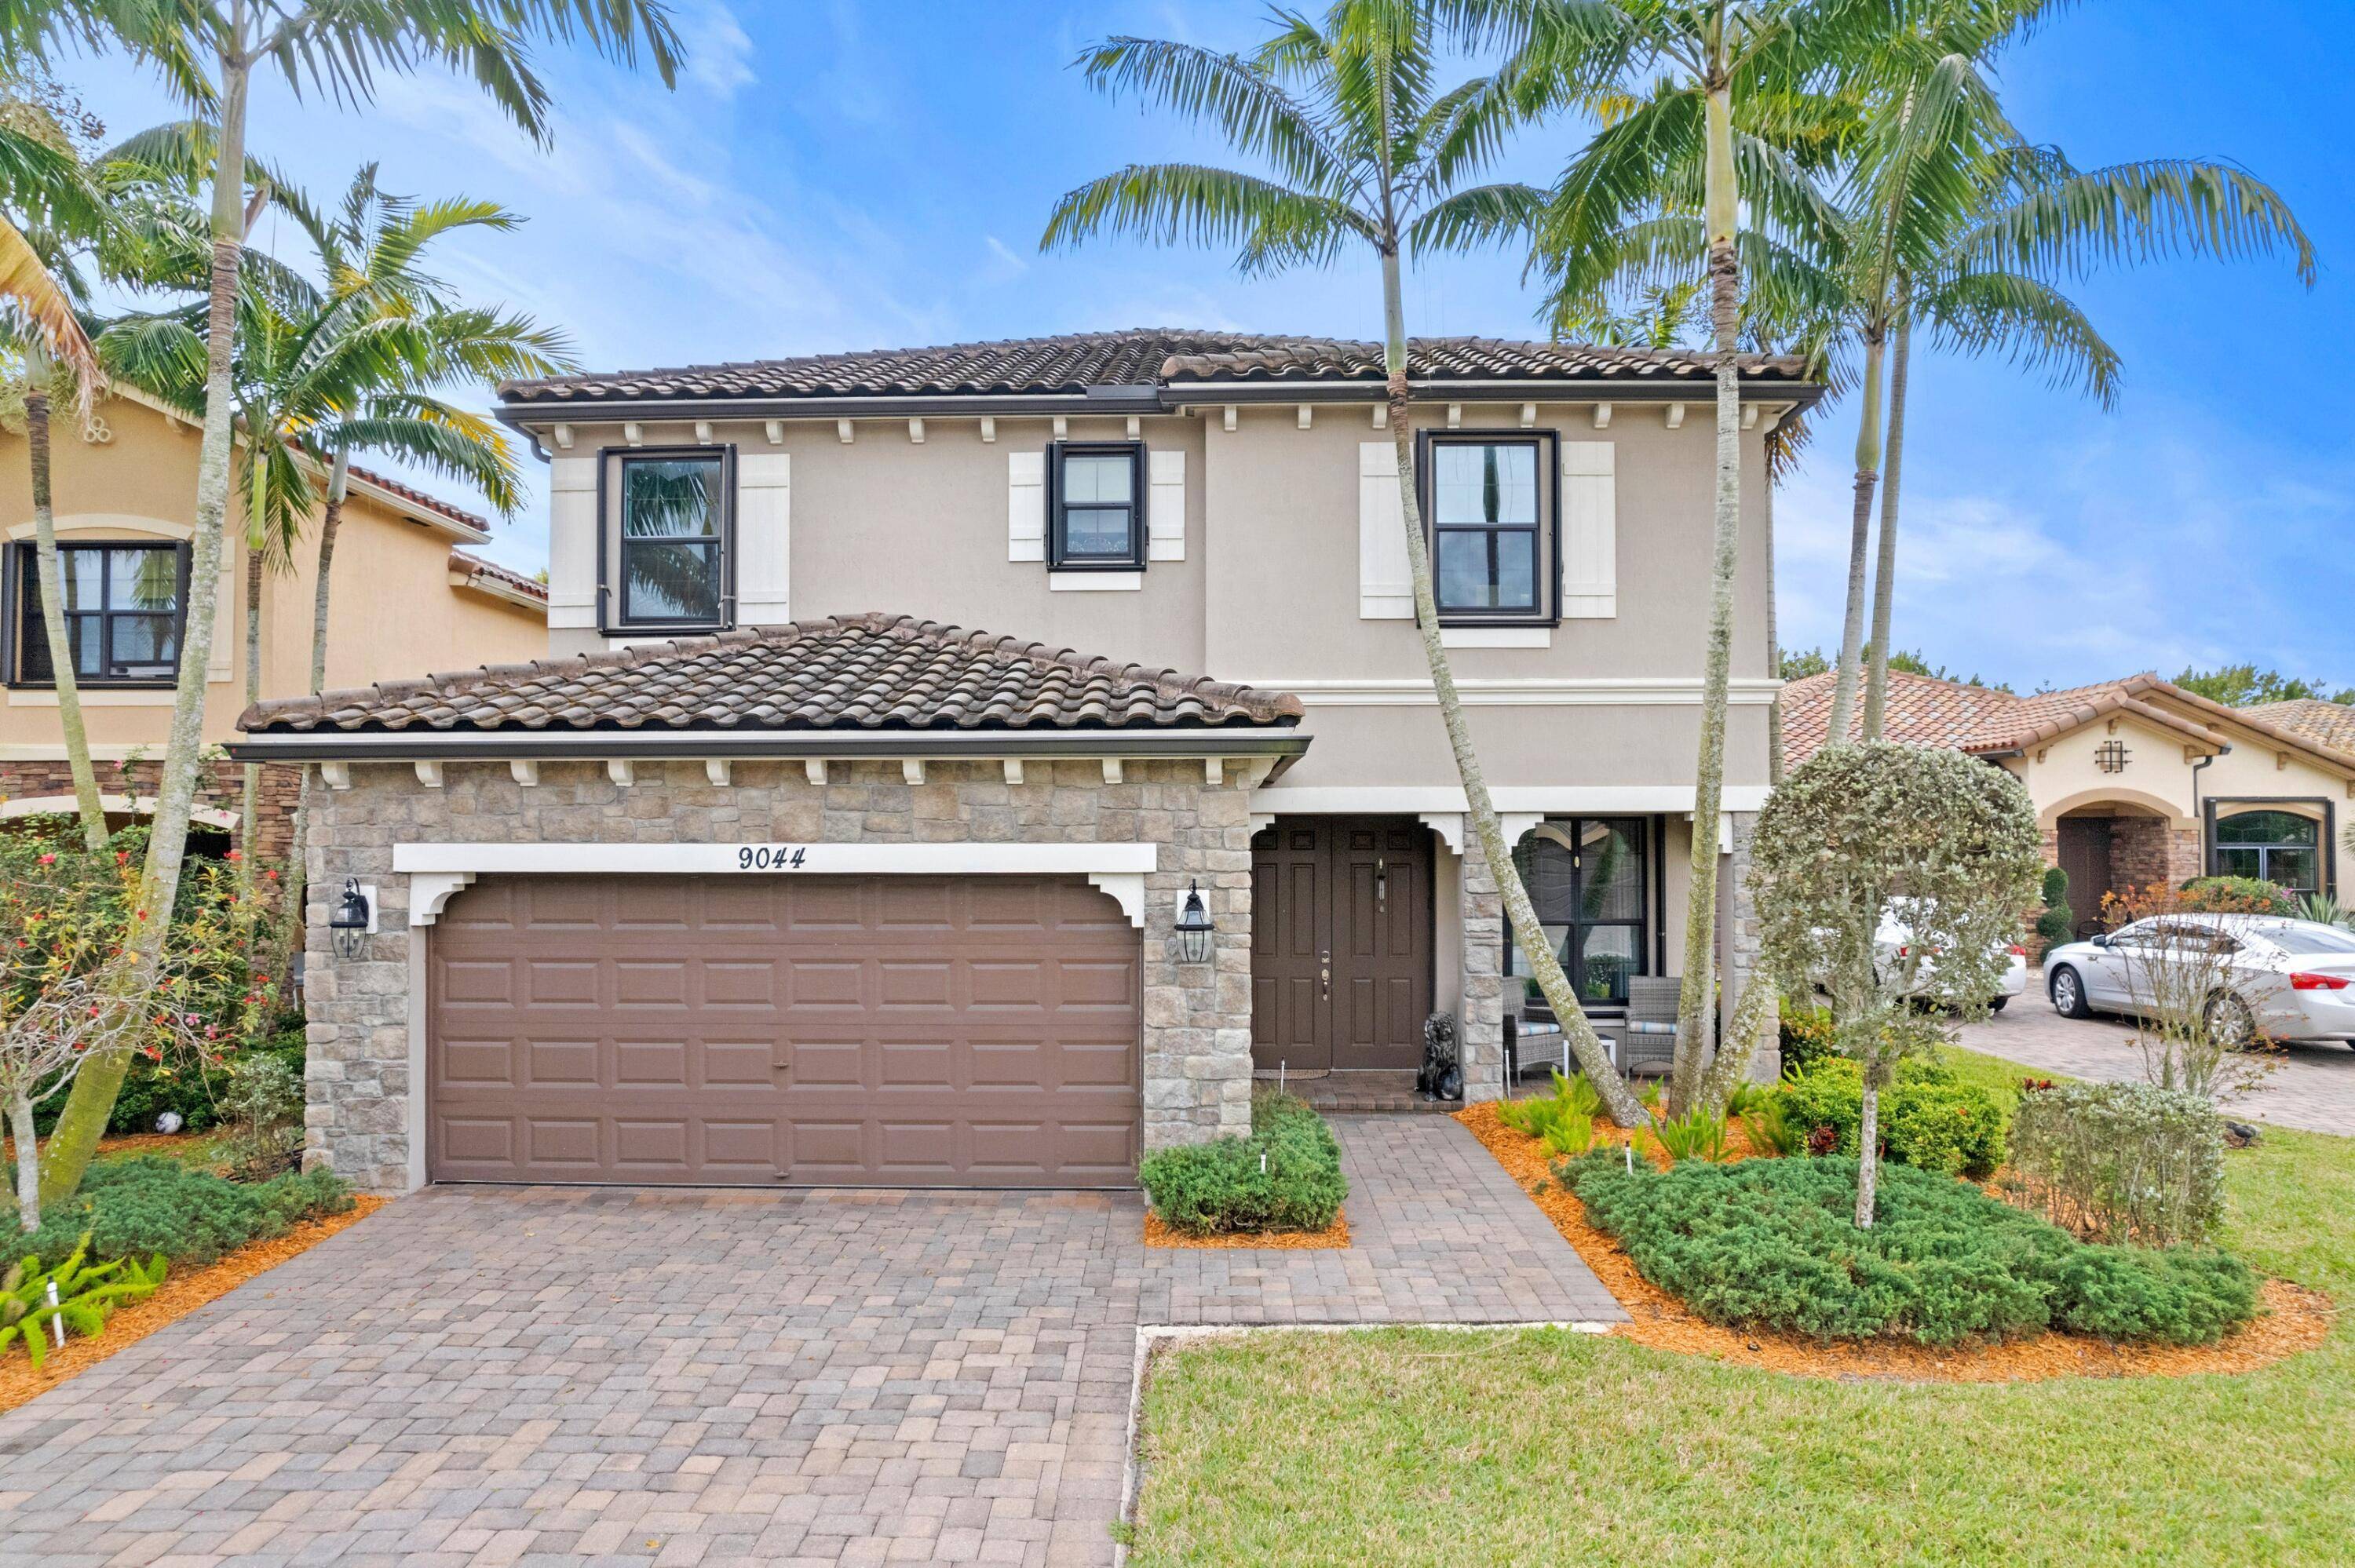 GORGEOUS NEW CONSTRUCTION 2 Story Single Family Home in the Most Desired Gated Community, Gulfstream Preserve !